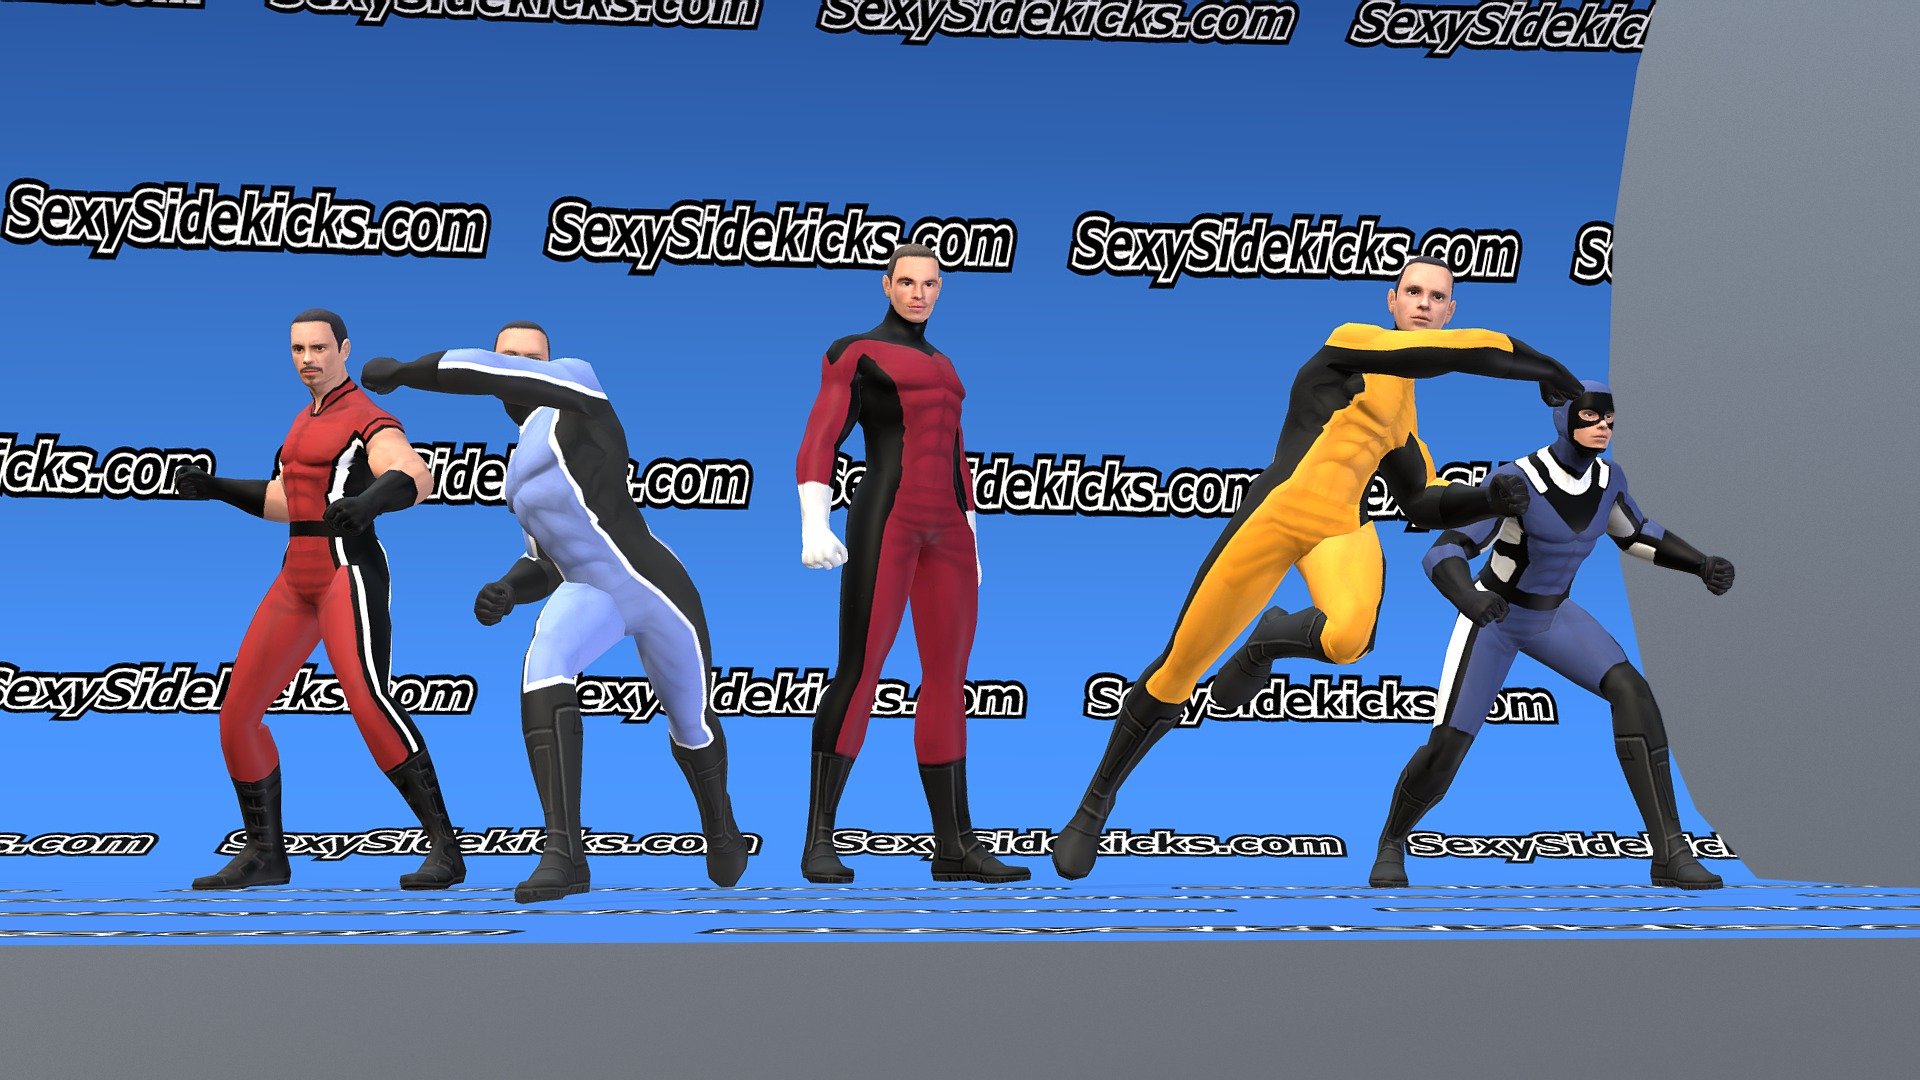 The Superhero Construction Kit will be for in sale May 2018. 

The Superhero Construction Kit includes:
        42 male superhero animations (root motion and non root included)
        42 female superhero animations (root motion and non root included)
        15 male outfits
        20 female outfits
        30 female hairstyles
        20 male hairstyles
        PSD layers for changing haircolor, eye color, faces, skin color
        PSD layers for outfits, so you can mix and match - The Superhero Construction Kit  Classic Males1-5 - 3D model by rungy 3d model